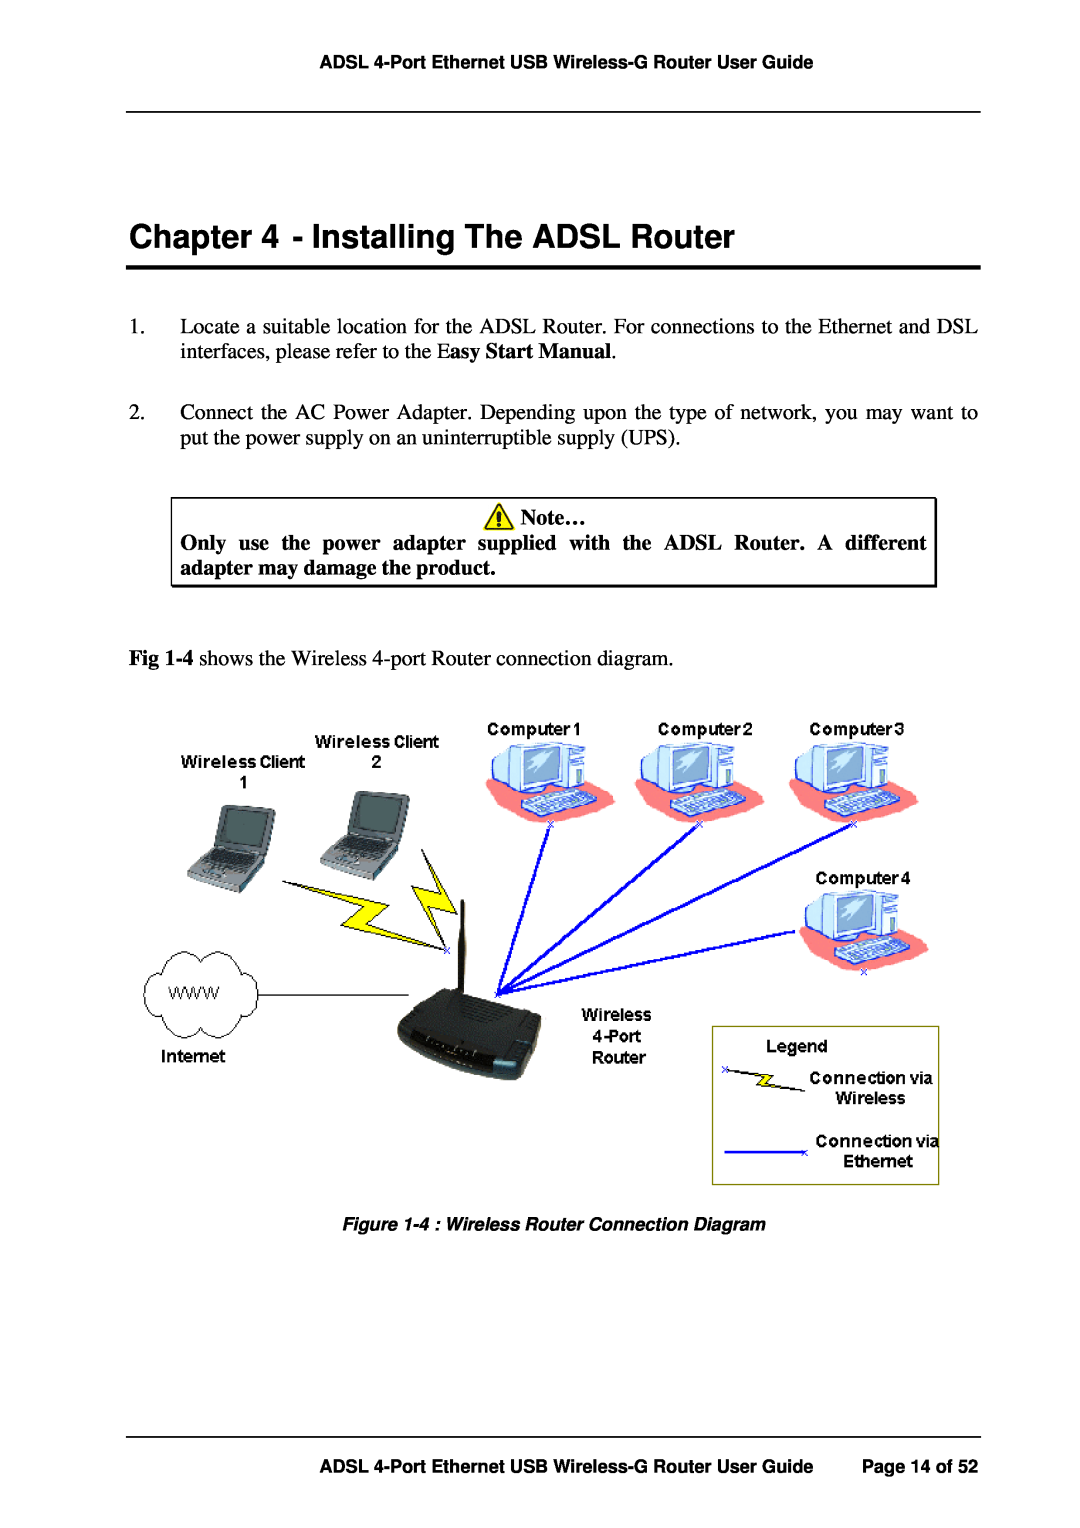 APC ADSL 4-Port manual Installing The ADSL Router, Note… 